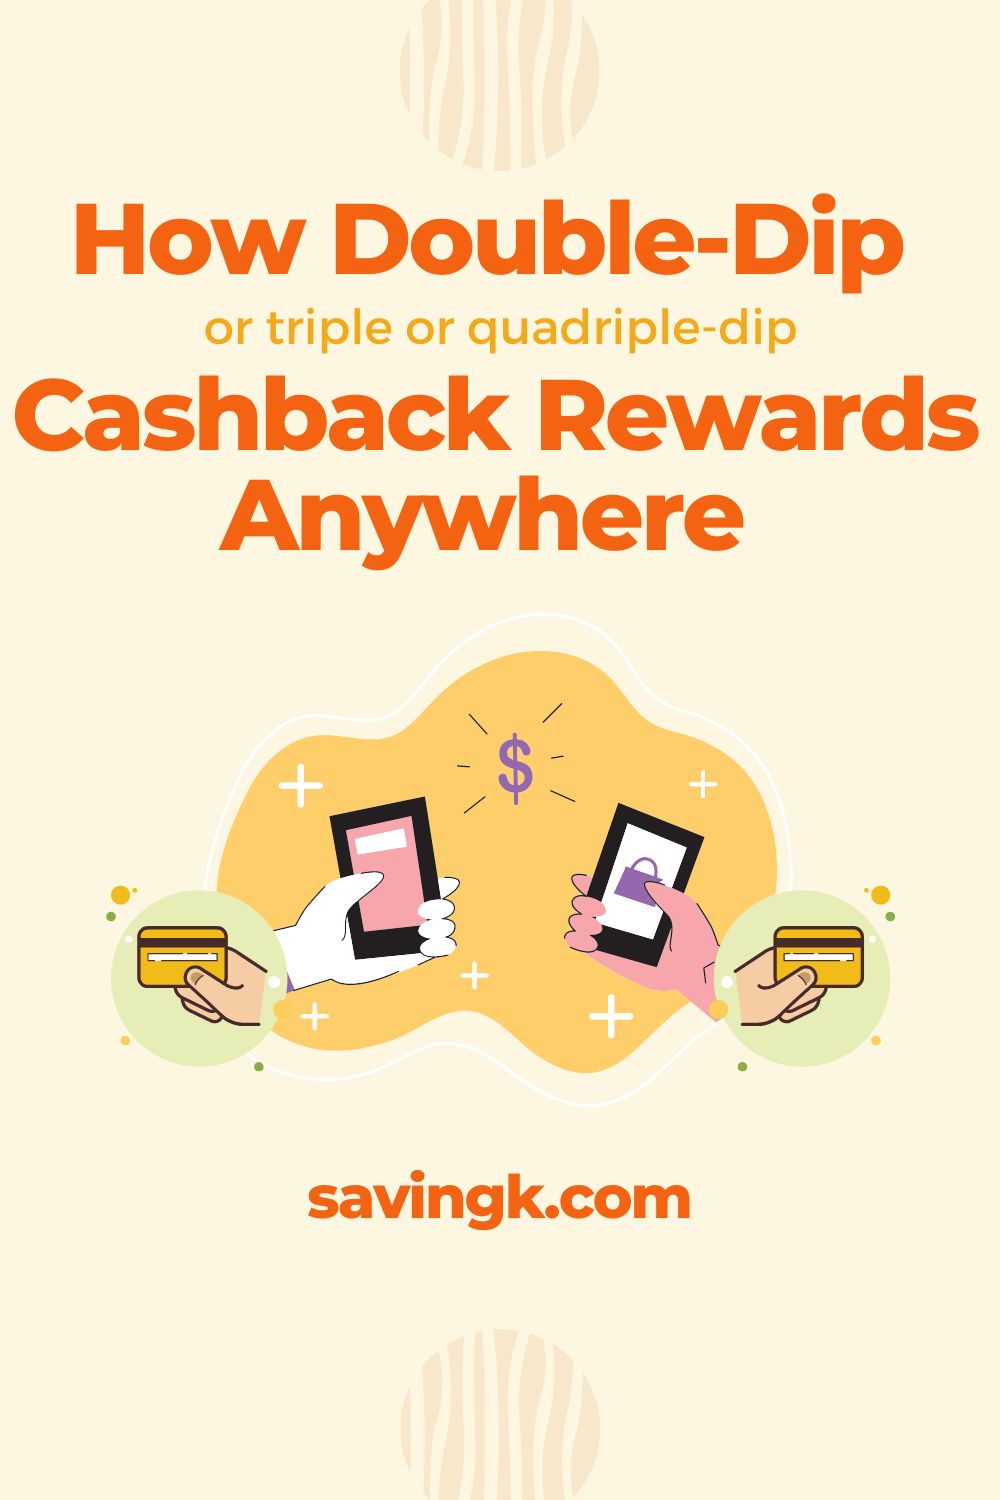 How to Double-Dip Cashback Rewards